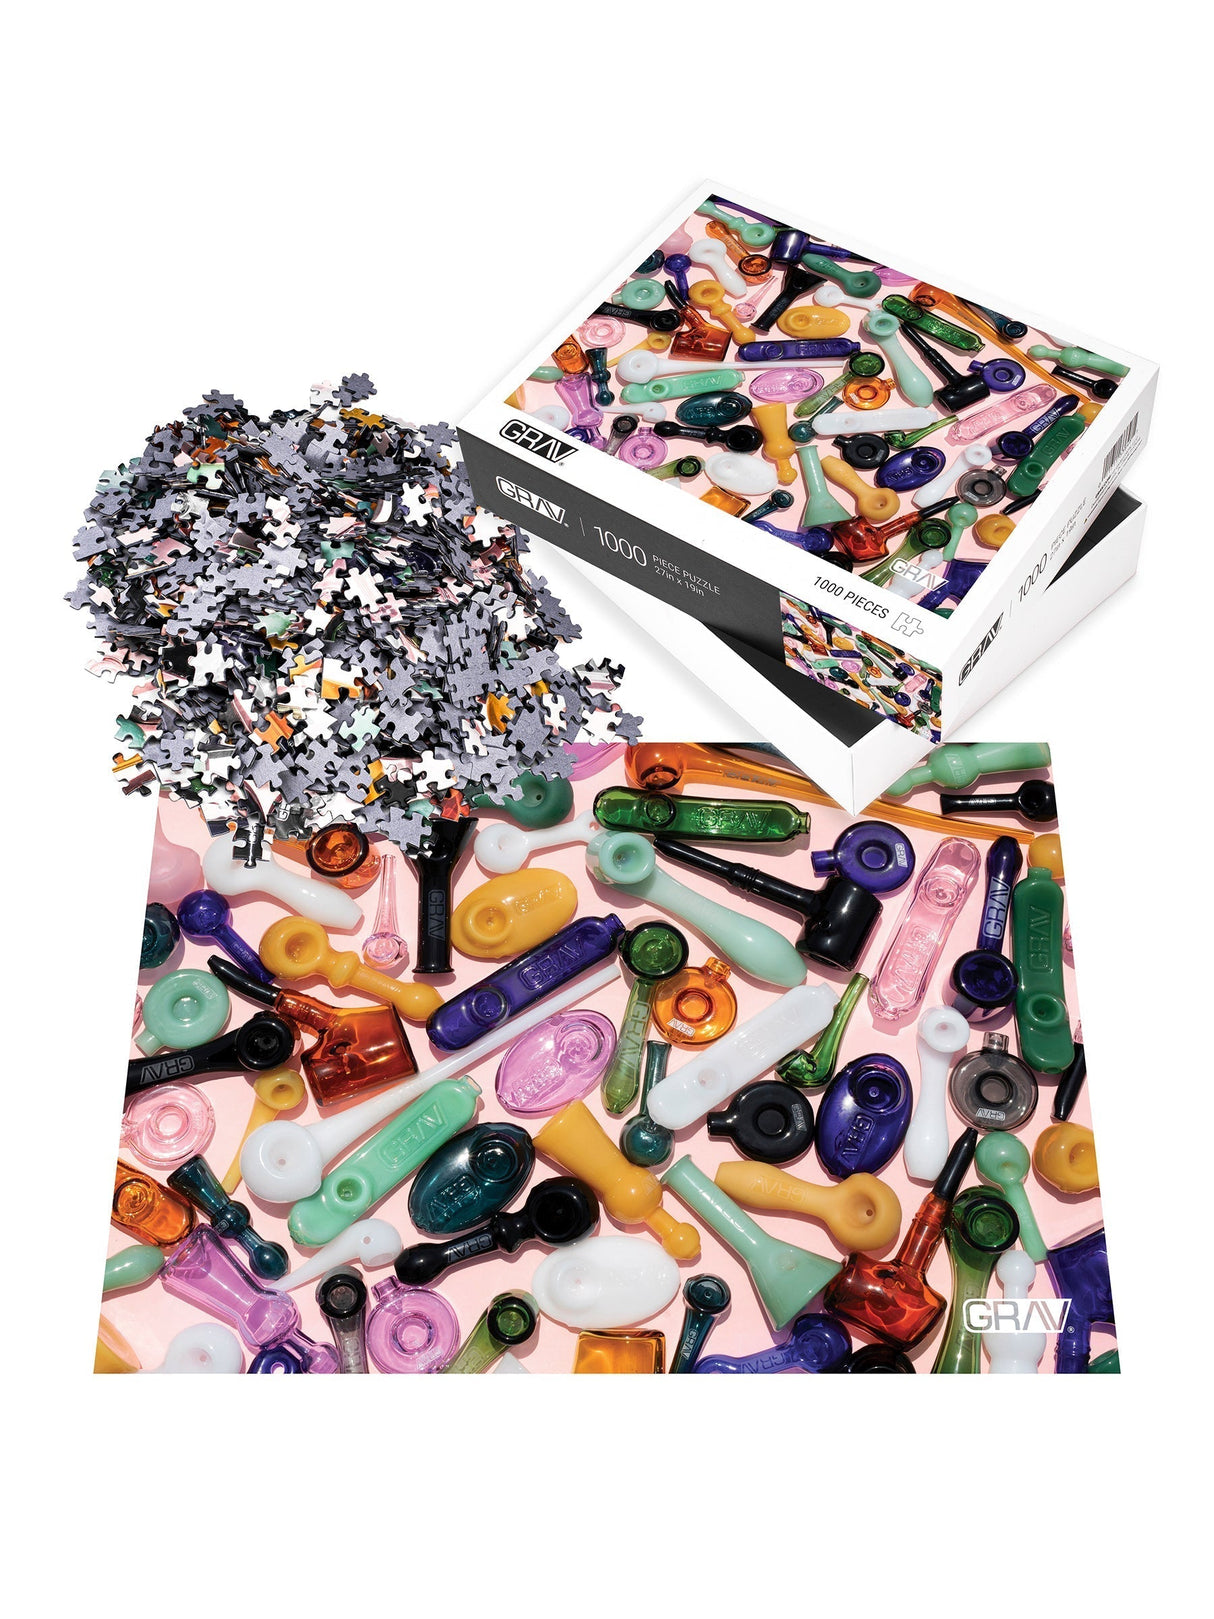 GRAV Puzzle featuring colorful glass pipe pieces, box view with loose jigsaw pieces